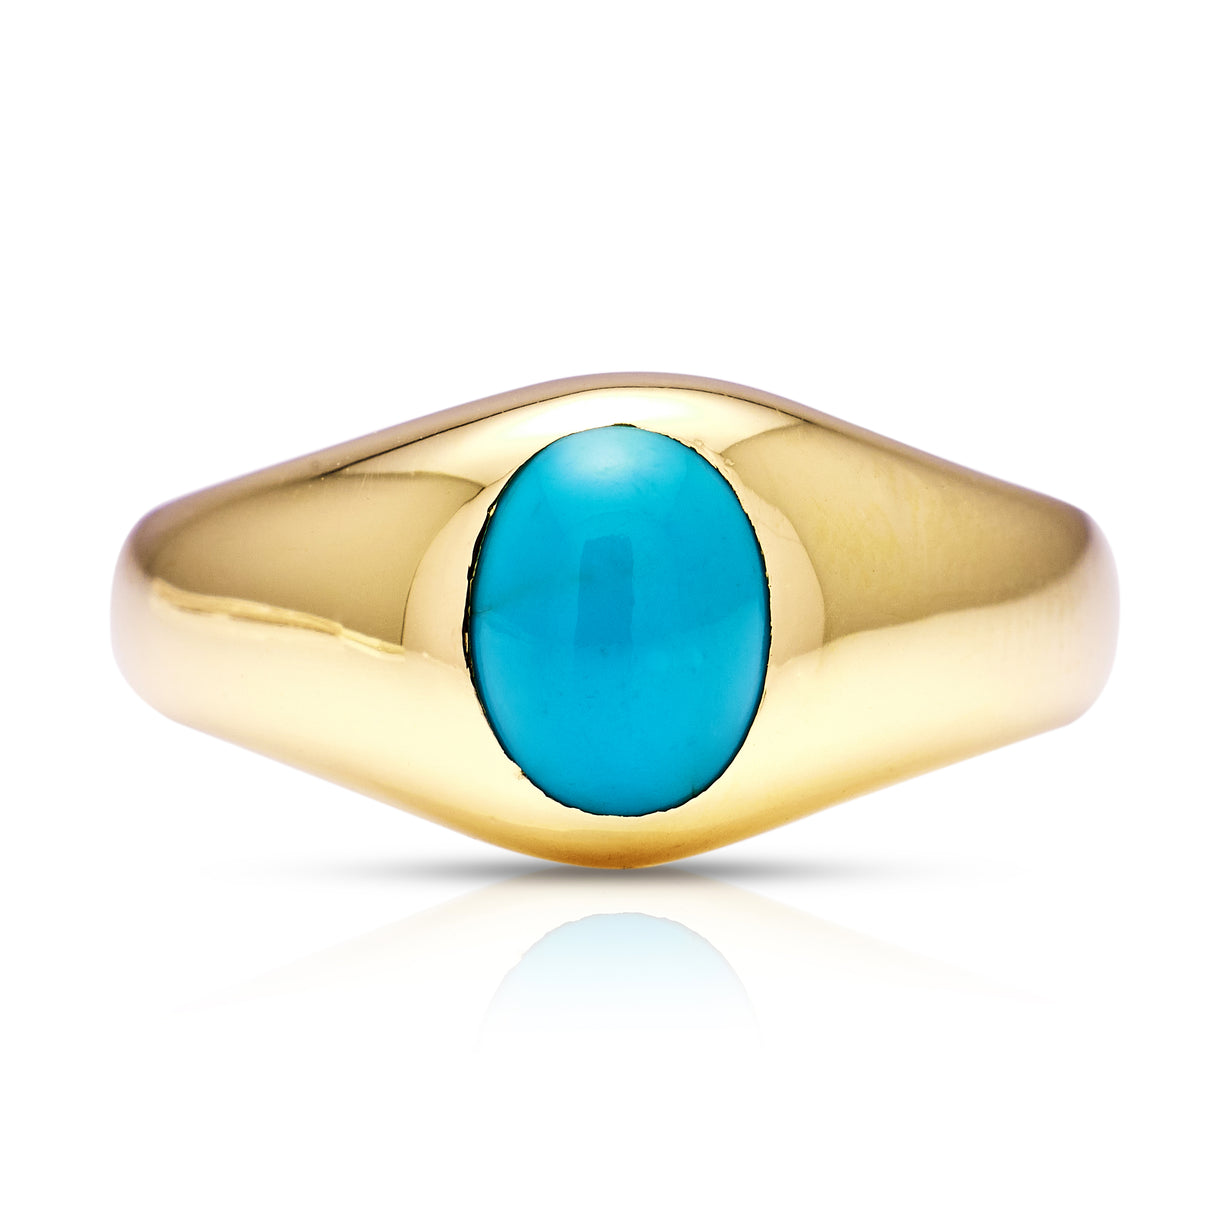 Antique, Single-Stone Turquoise Gypsy Ring, 18ct Yellow Gold front view